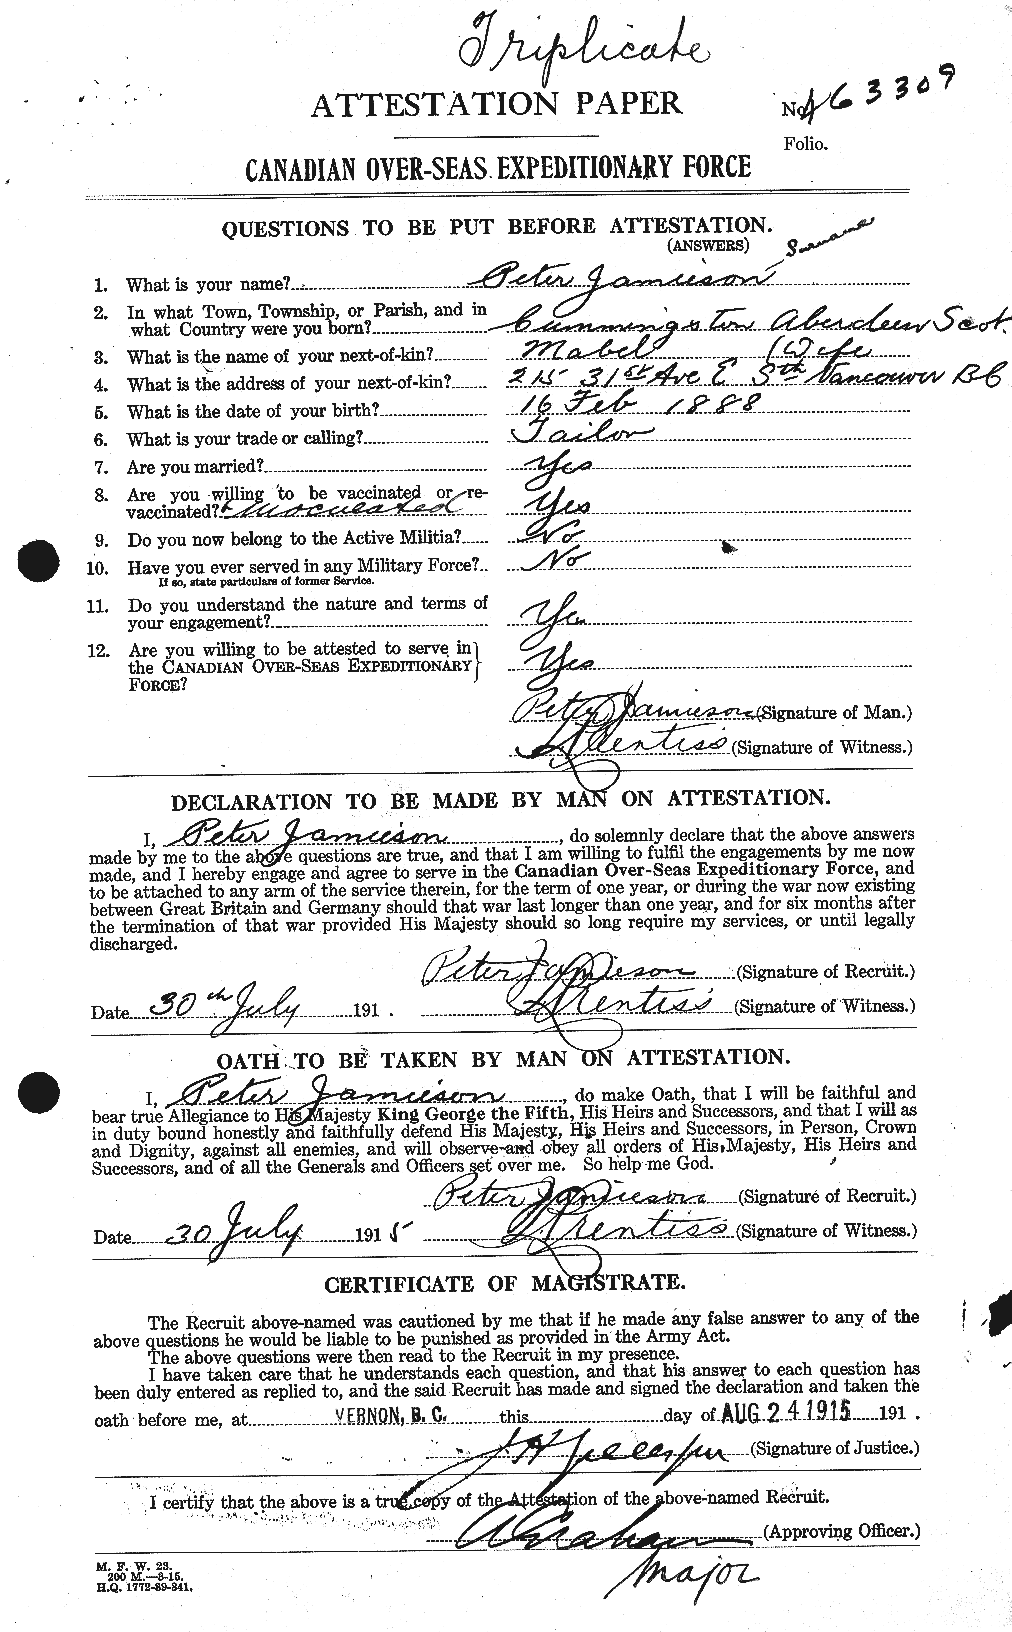 Personnel Records of the First World War - CEF 415236a